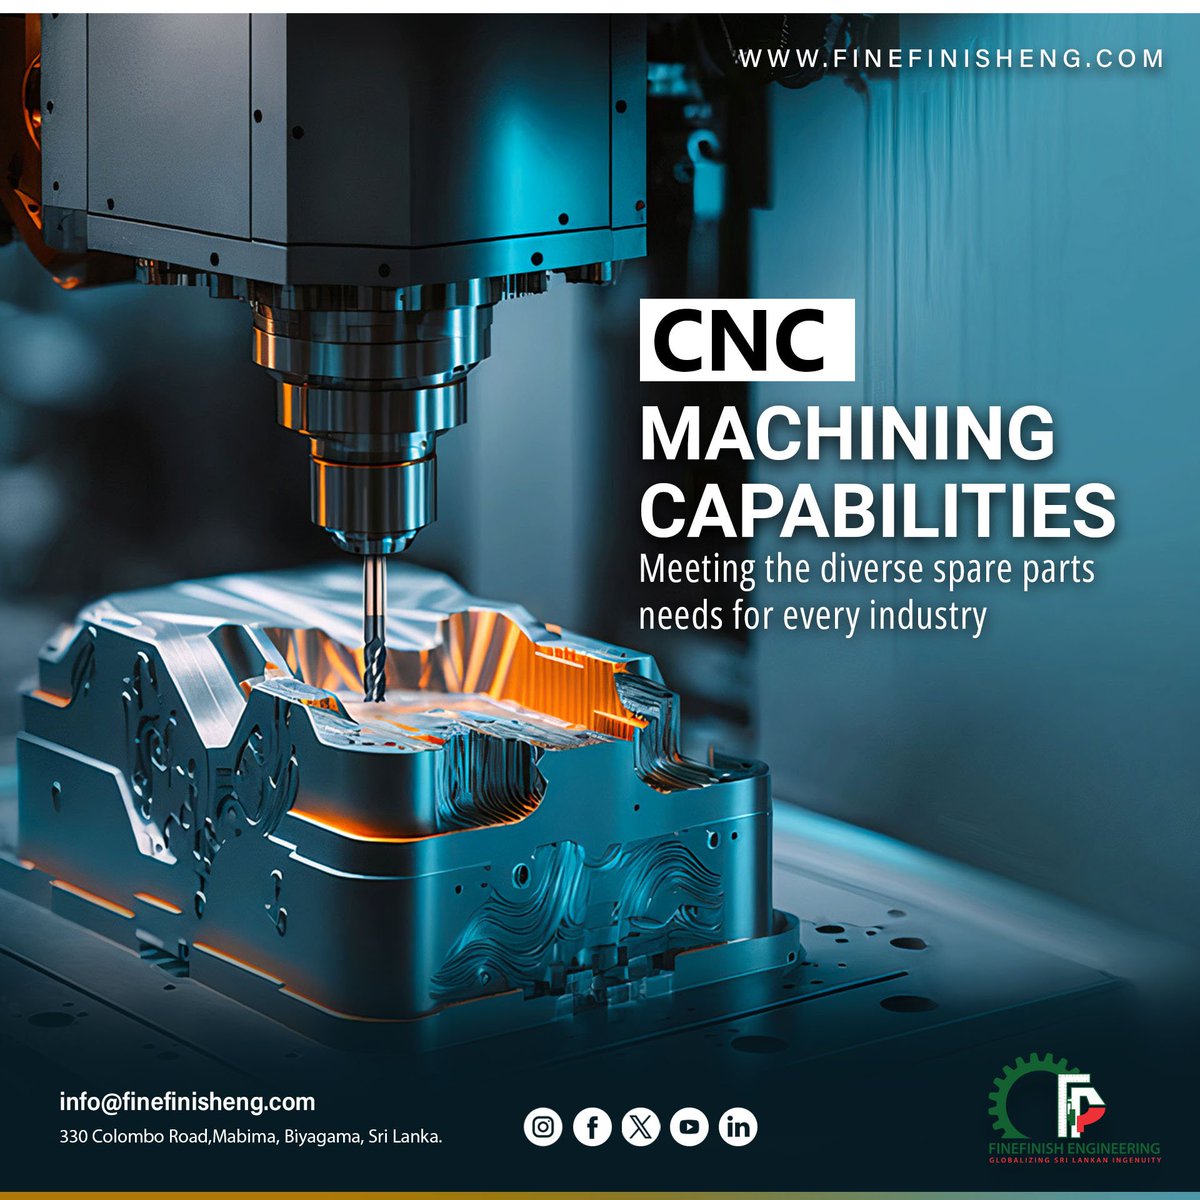 FineFinish Engineering offers high-quality CNC machining services at affordable prices, utilizing a state-of-the-art facility to ensure that your parts are manufactured to precise specifications.
To discuss your project, please contact us now at 0776 56 56 56
#spareparts